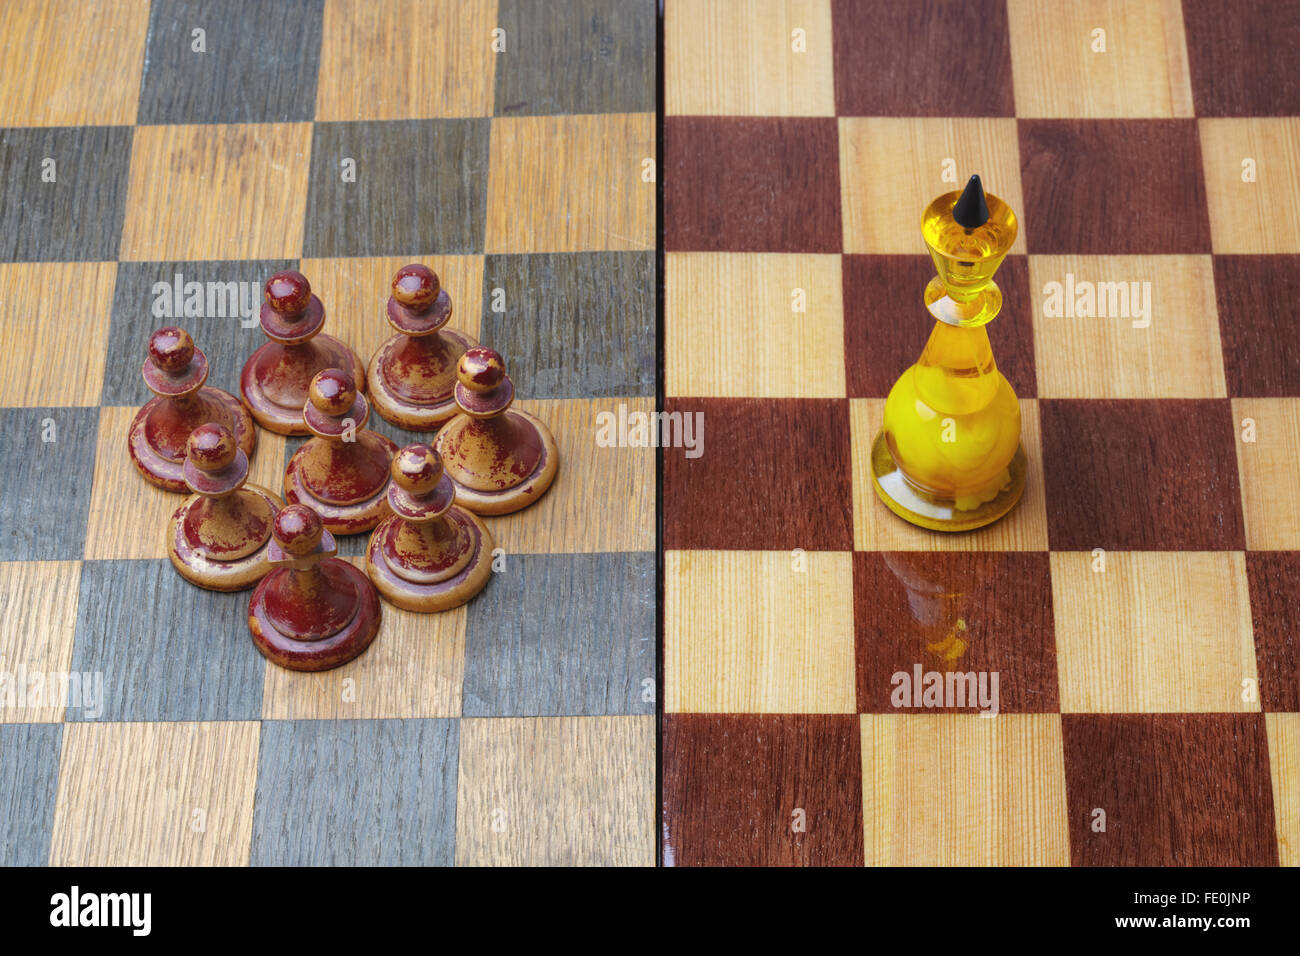 Luxurious chess king opposing shabby pawns in concept of social inequality. Stock Photo